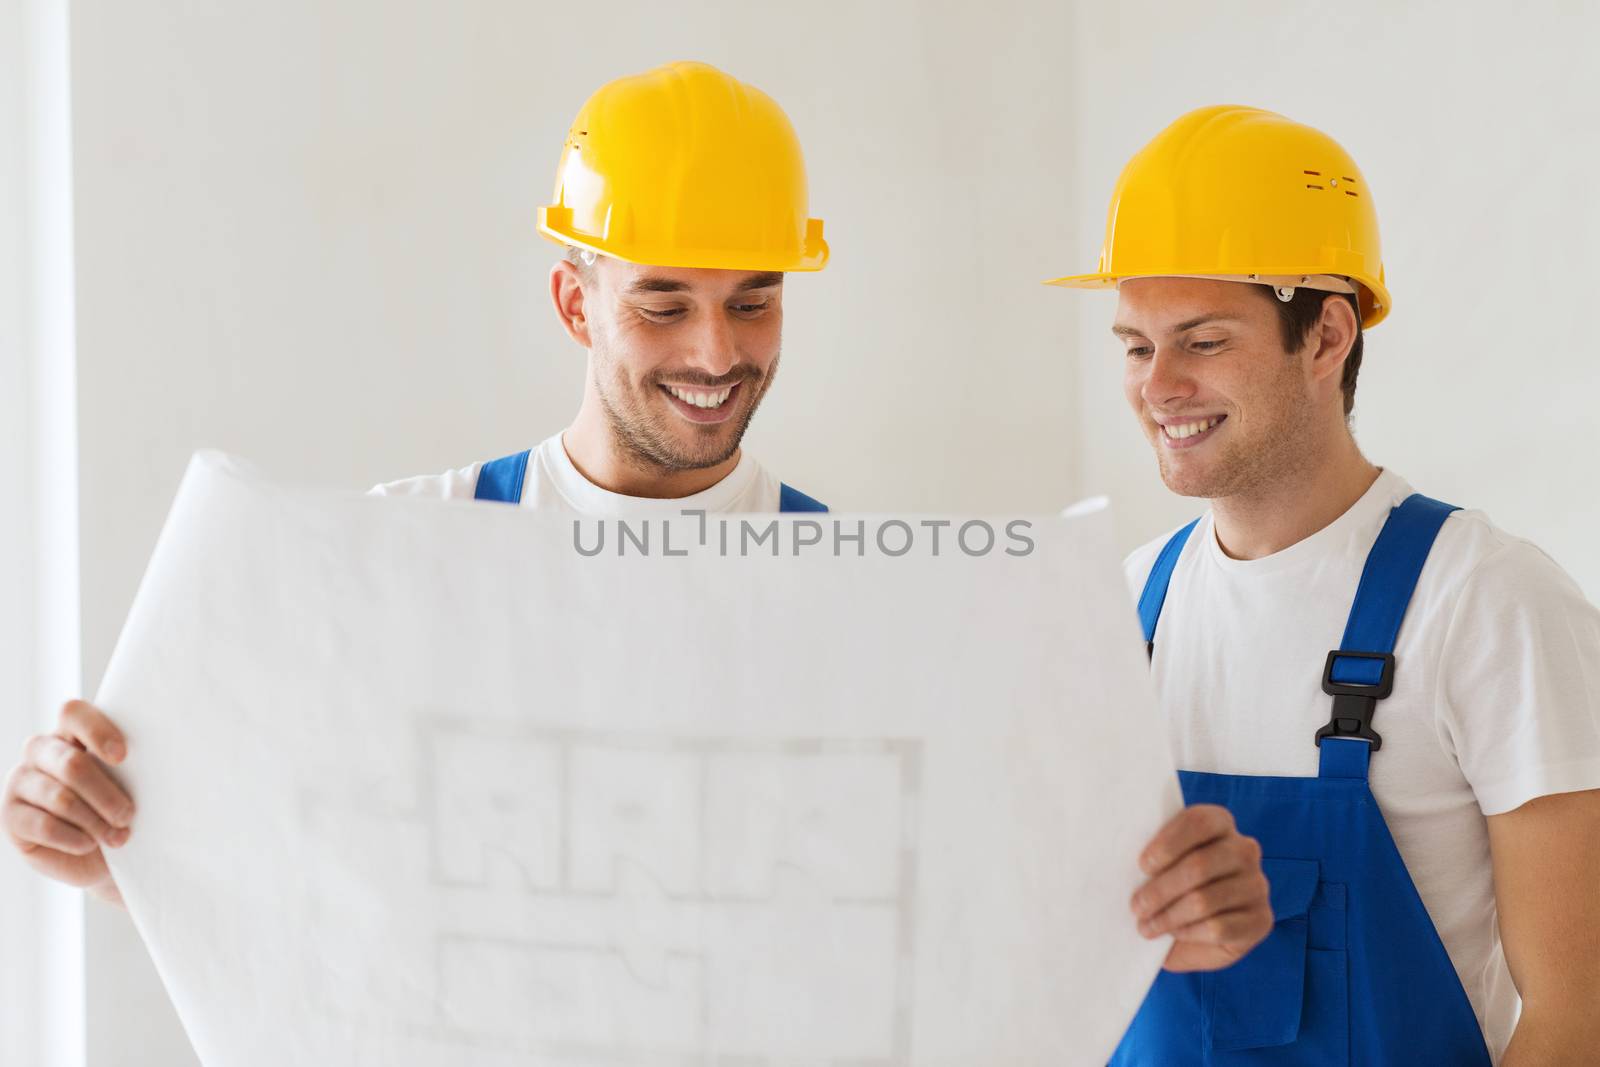 building, teamwork and people concept - group of smiling builders in hardhats with blueprint indoors